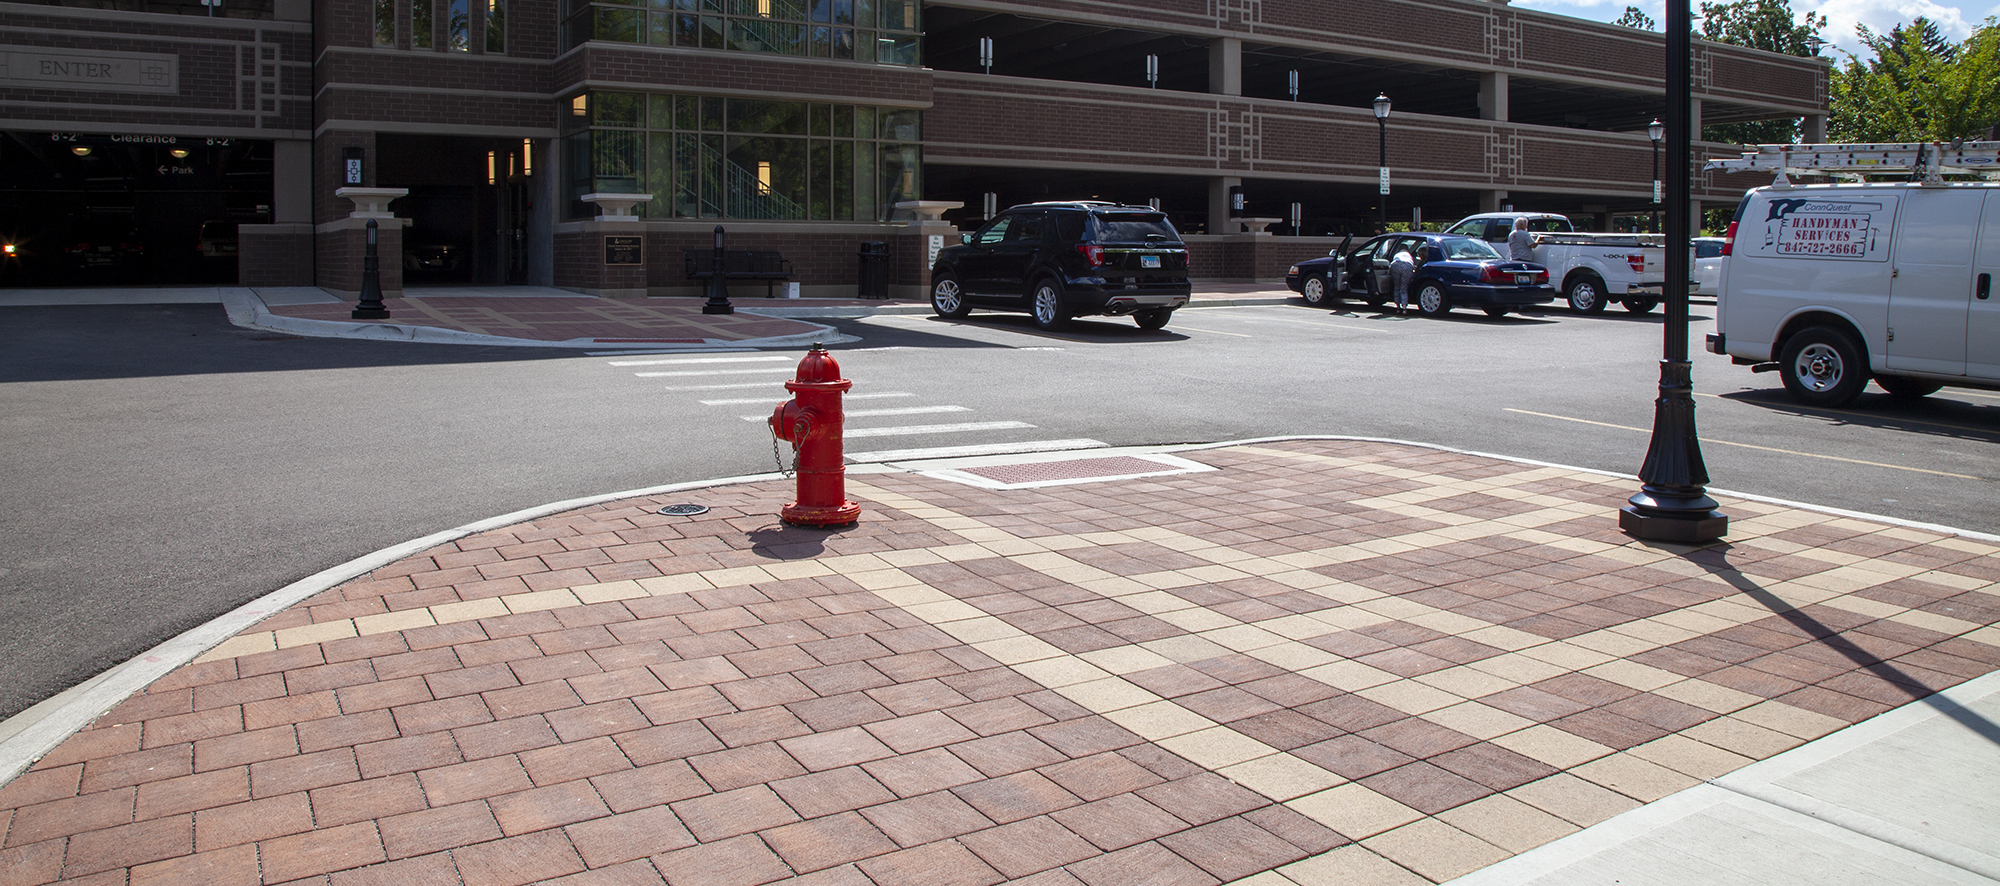 Cars are parked in front of a parking garage in an outdoor lot with raised curbs of red and beige Eco-Priora pavers, lights and a hydrant.